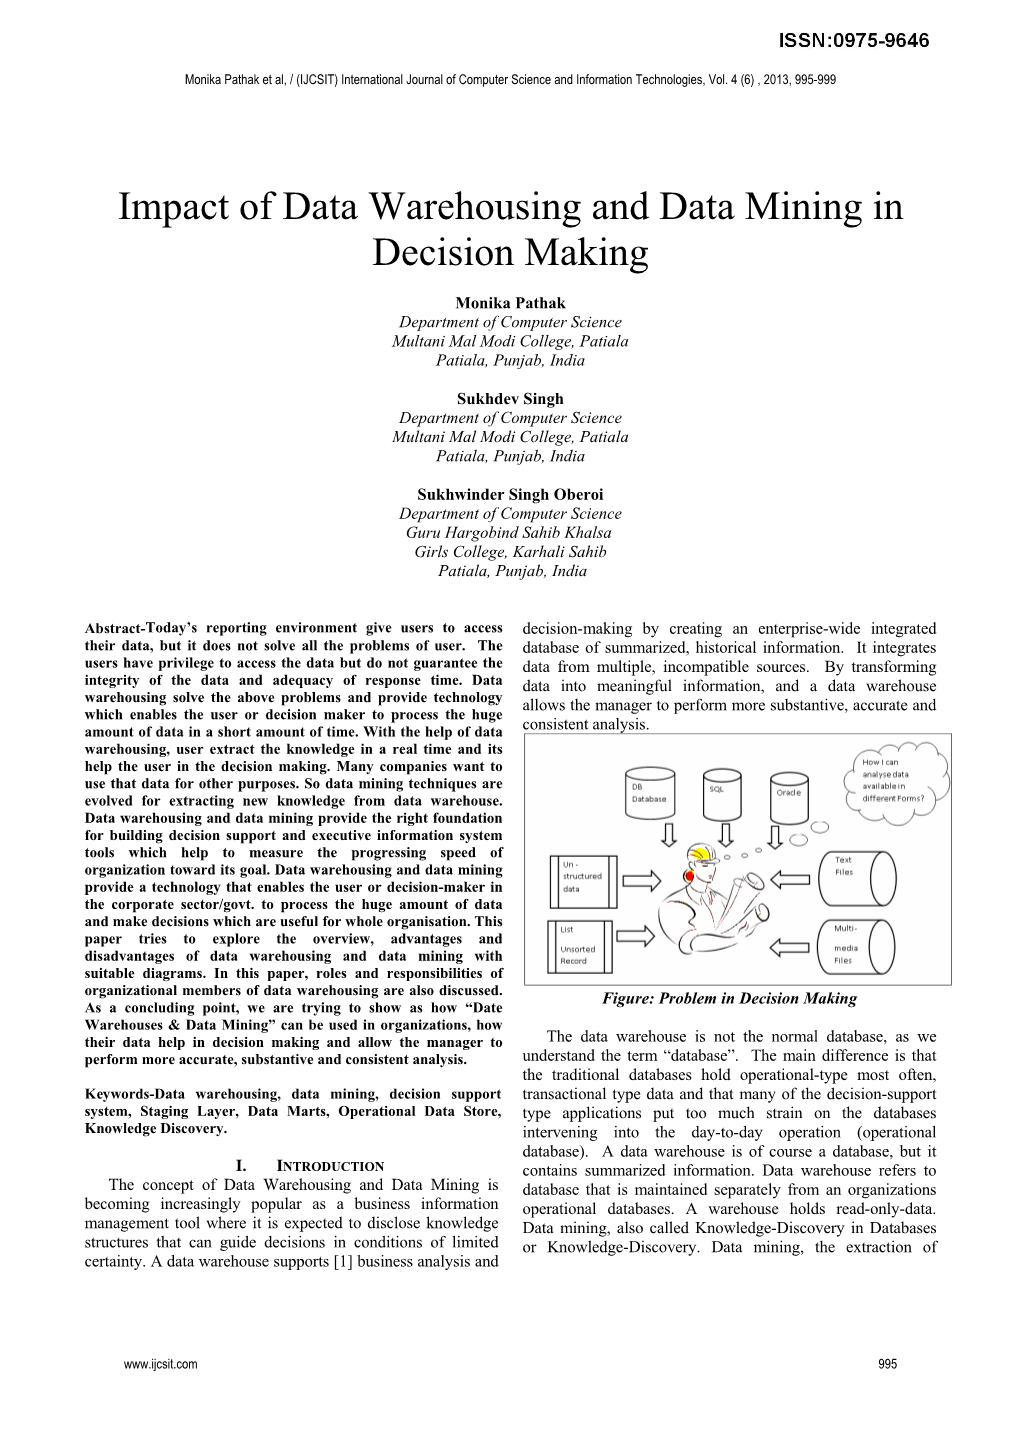 Impact of Data Warehousing and Data Mining in Decision Making